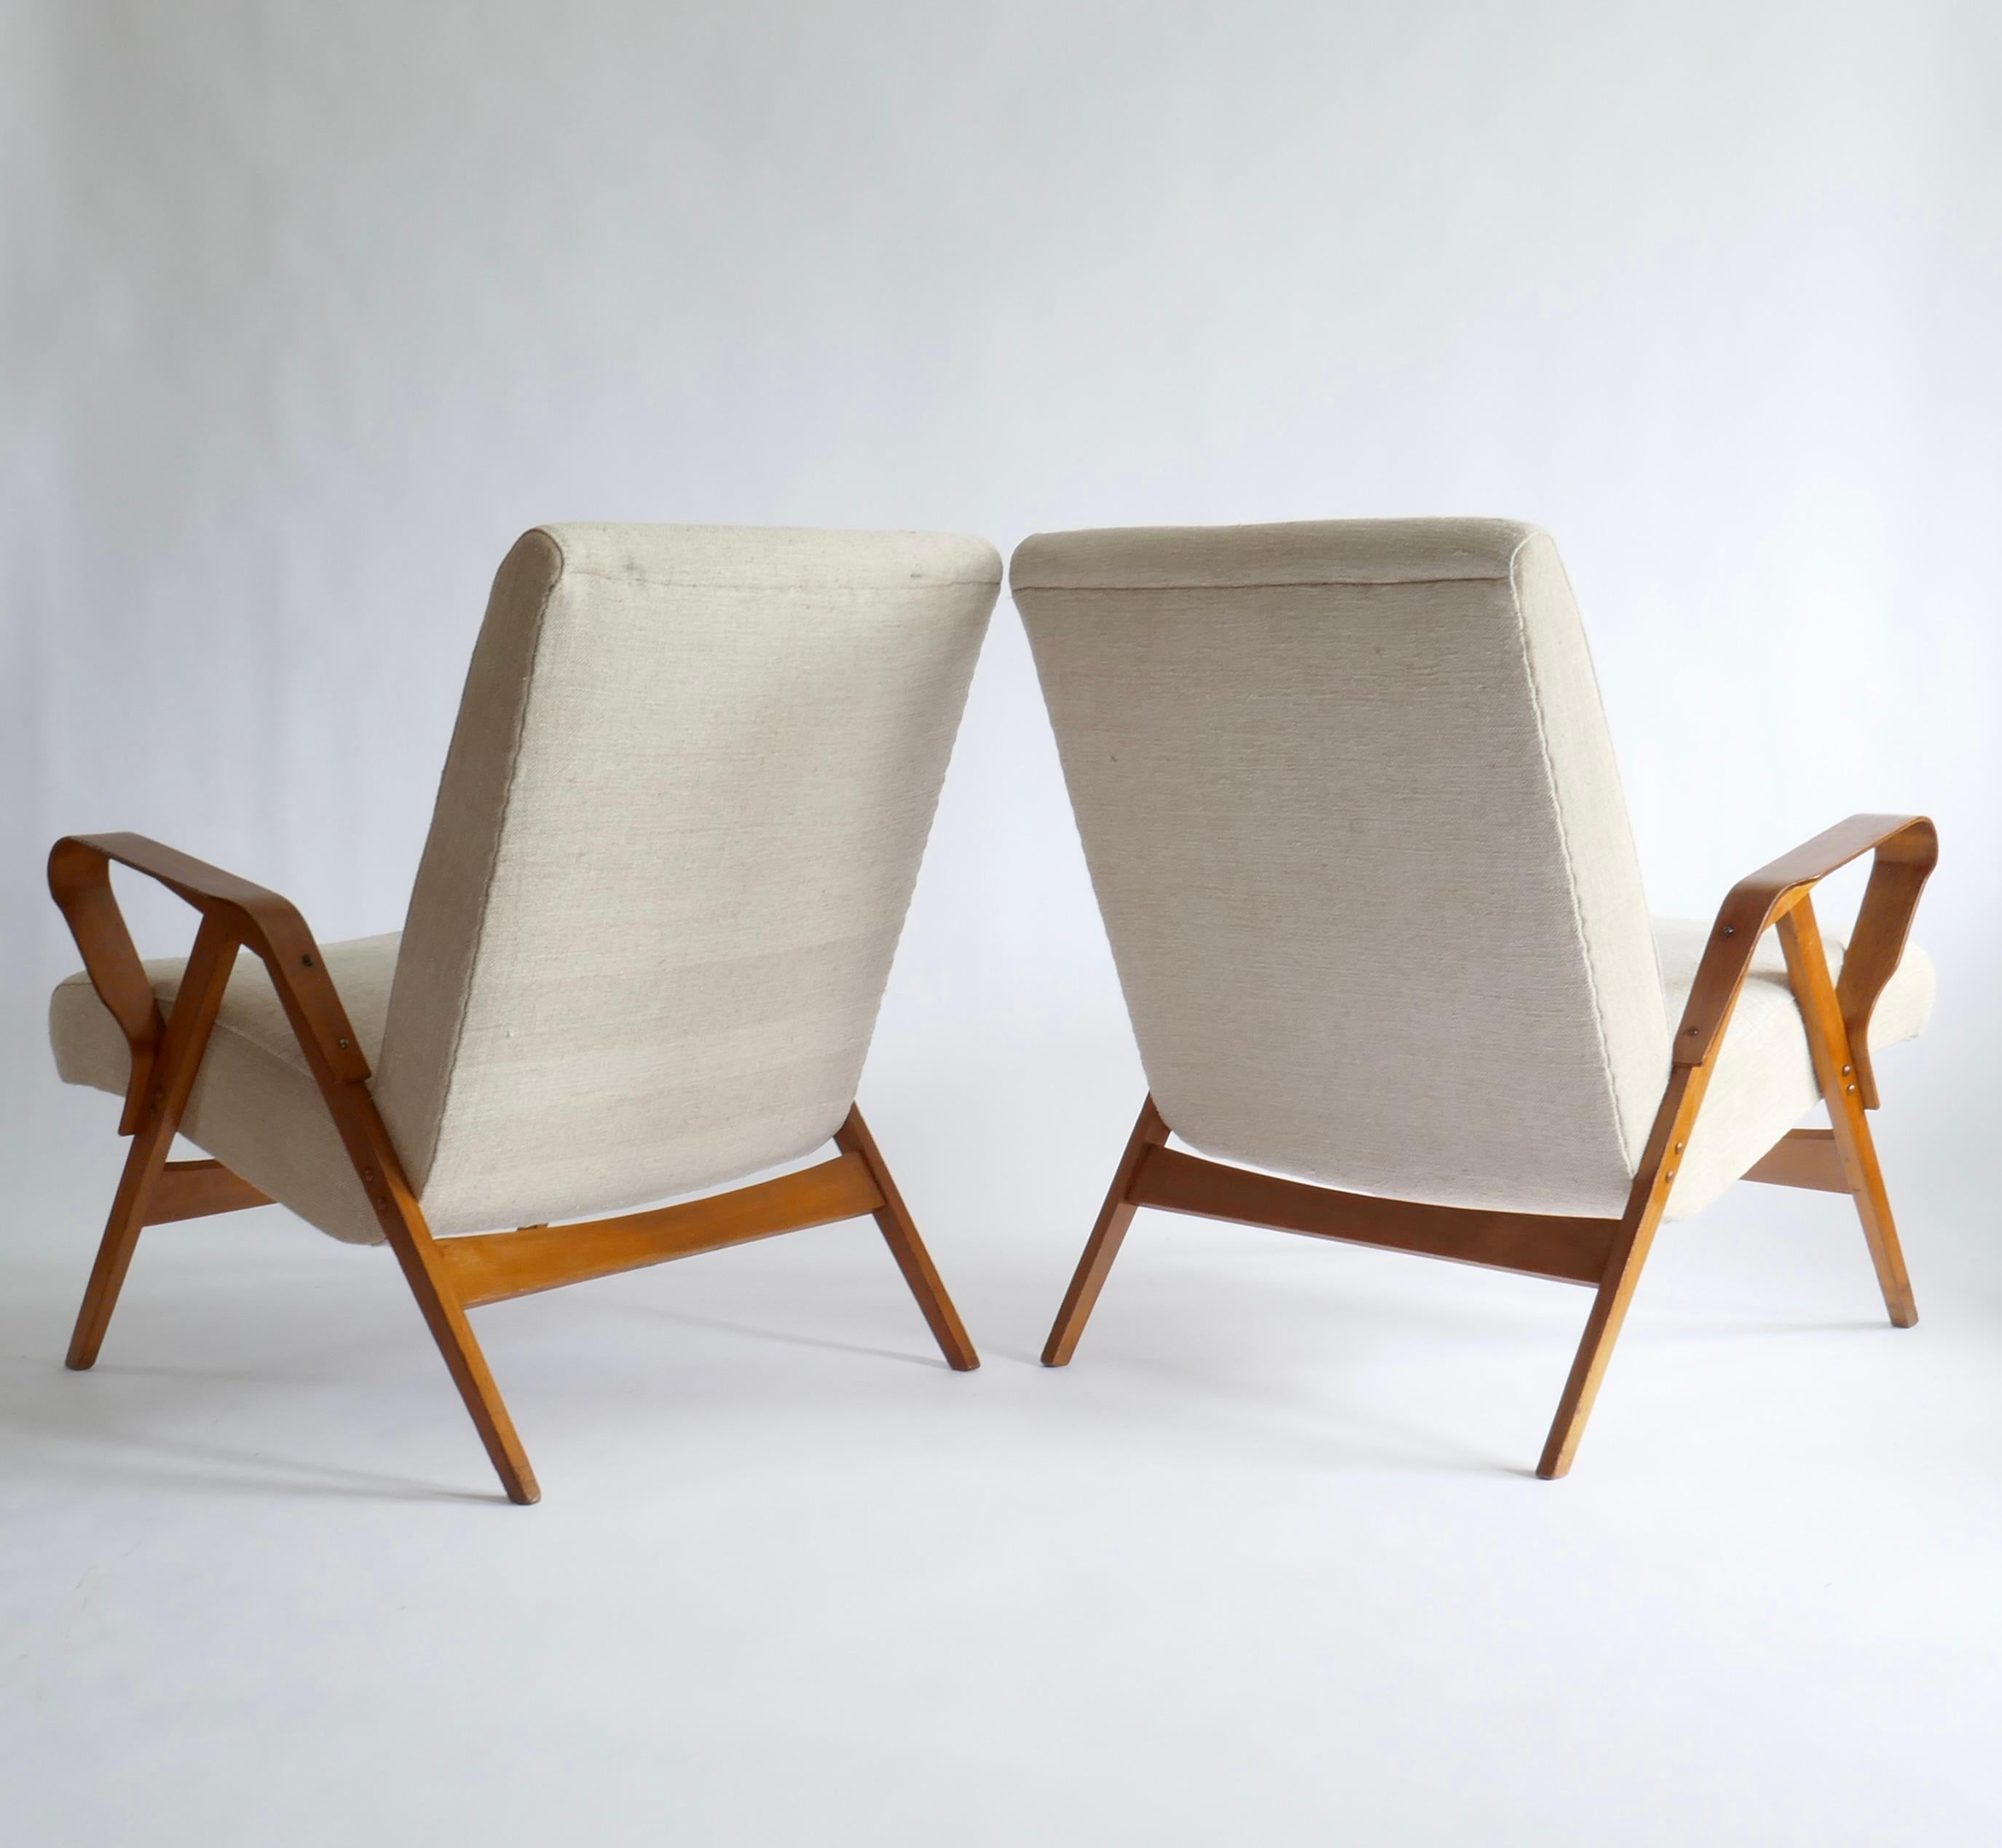 Upholstery Pair of Lounge Chairs Upholstered in off White Vintage Linen, 1960s